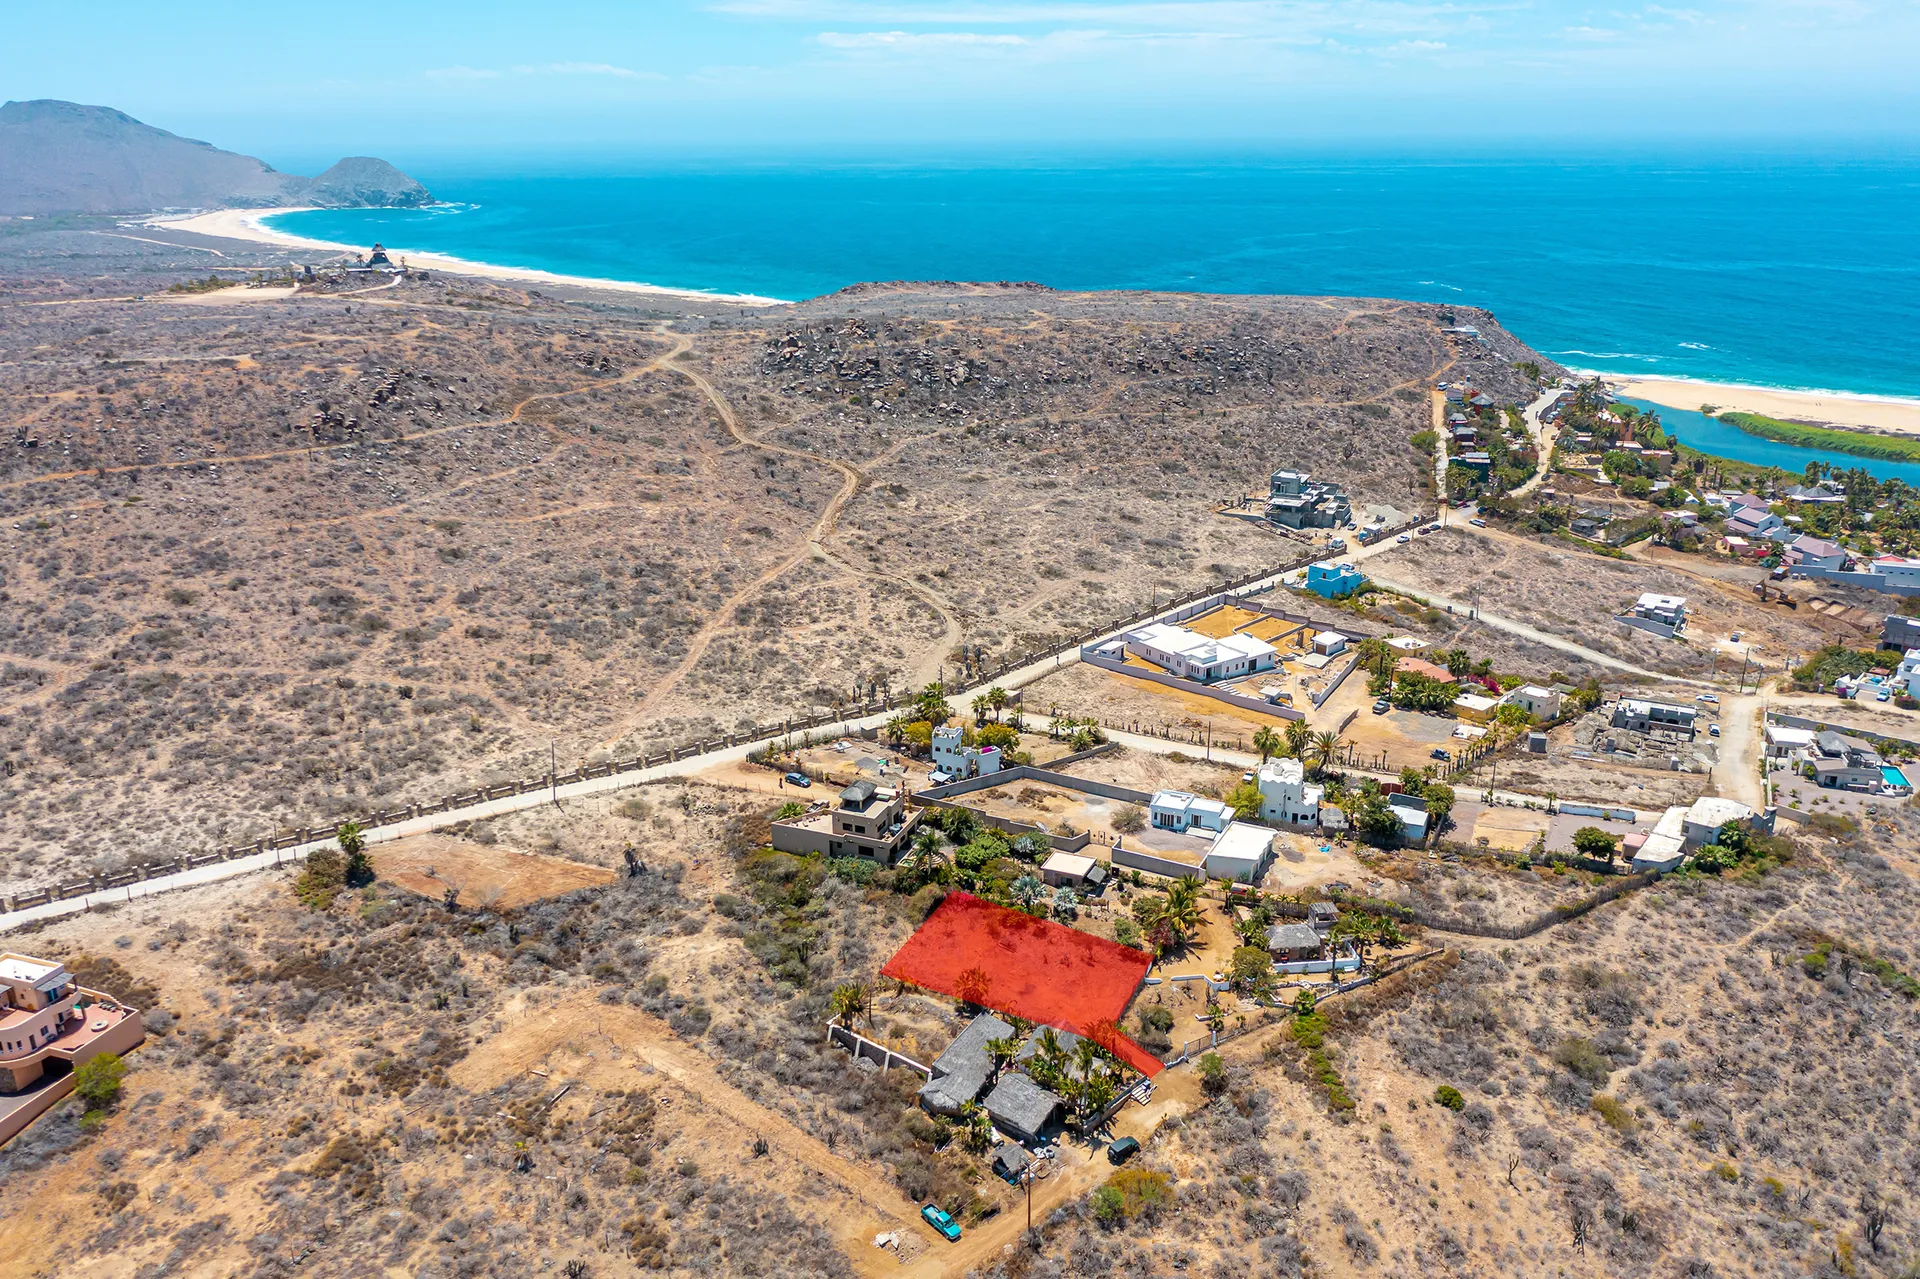 Travel an hour from the Los Cabos and La Paz municipal airports to discover the charming town of Todos Santos.